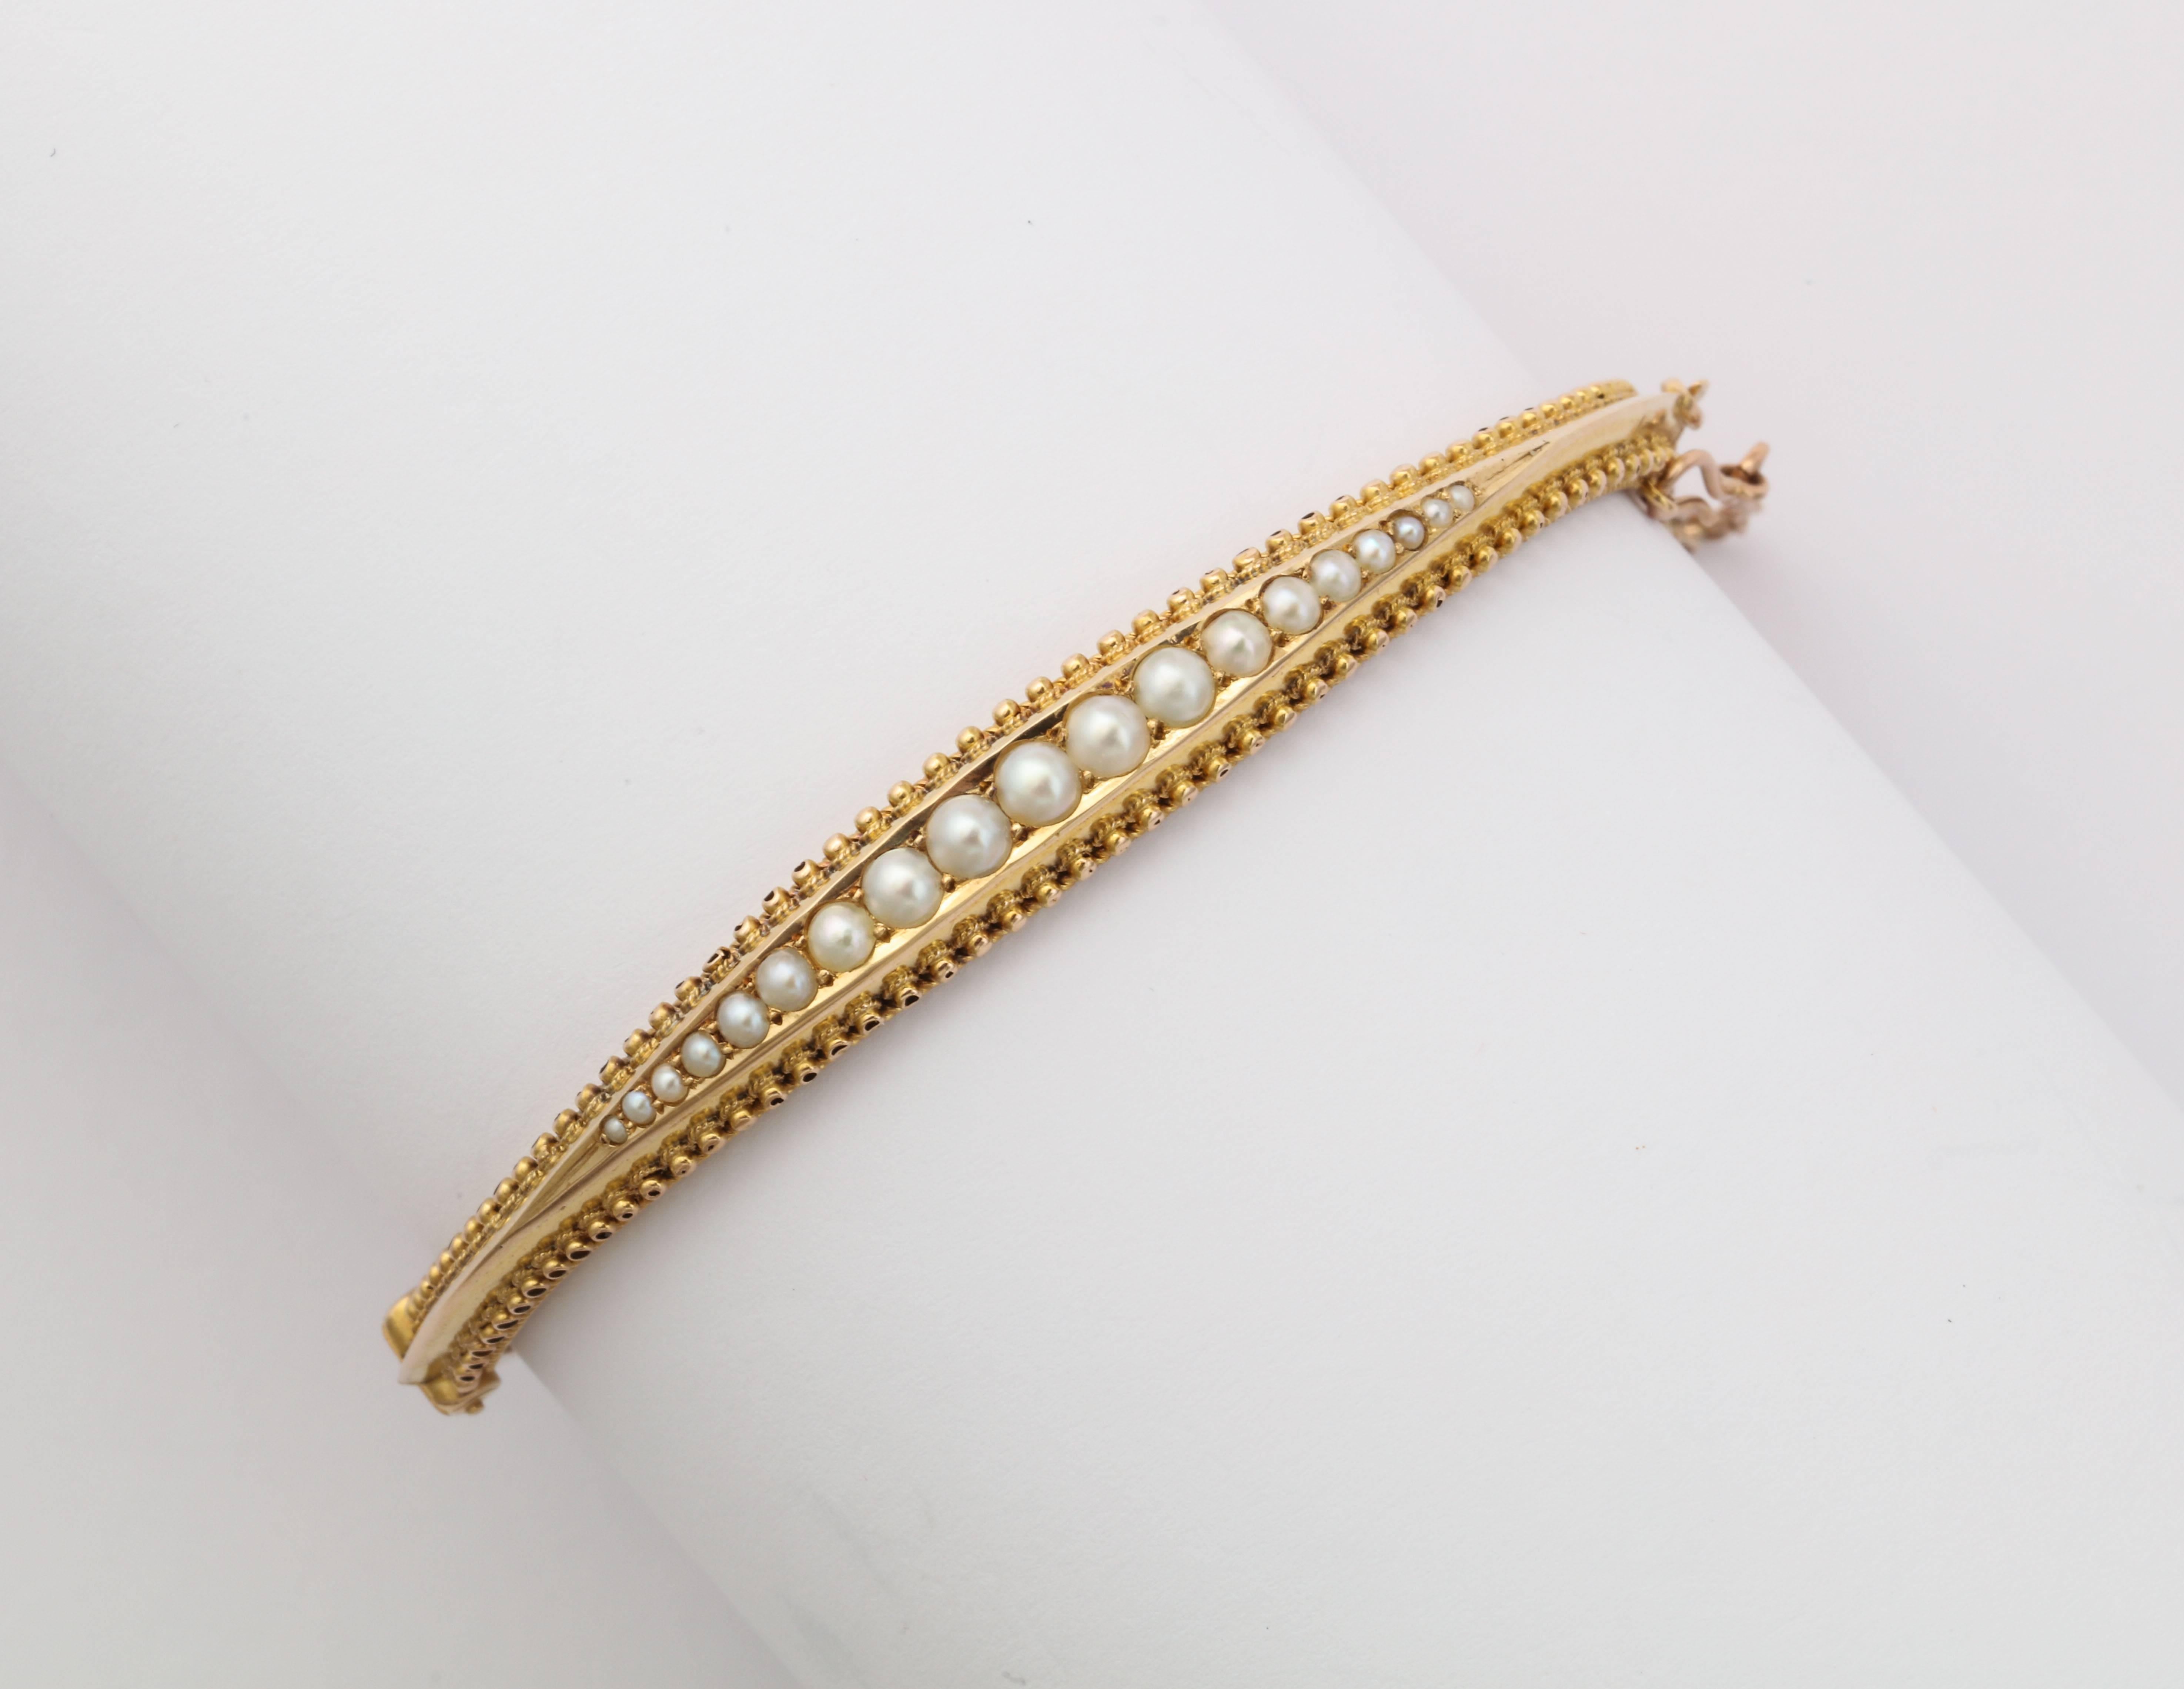 This glowing, beautifully made jewel of a bracelet in 15kt gold, is set with nineteen graduated natural freshwater pearls that are perfectly matched.  The design is timeless and modern though it was created early in the 20th century. At the north